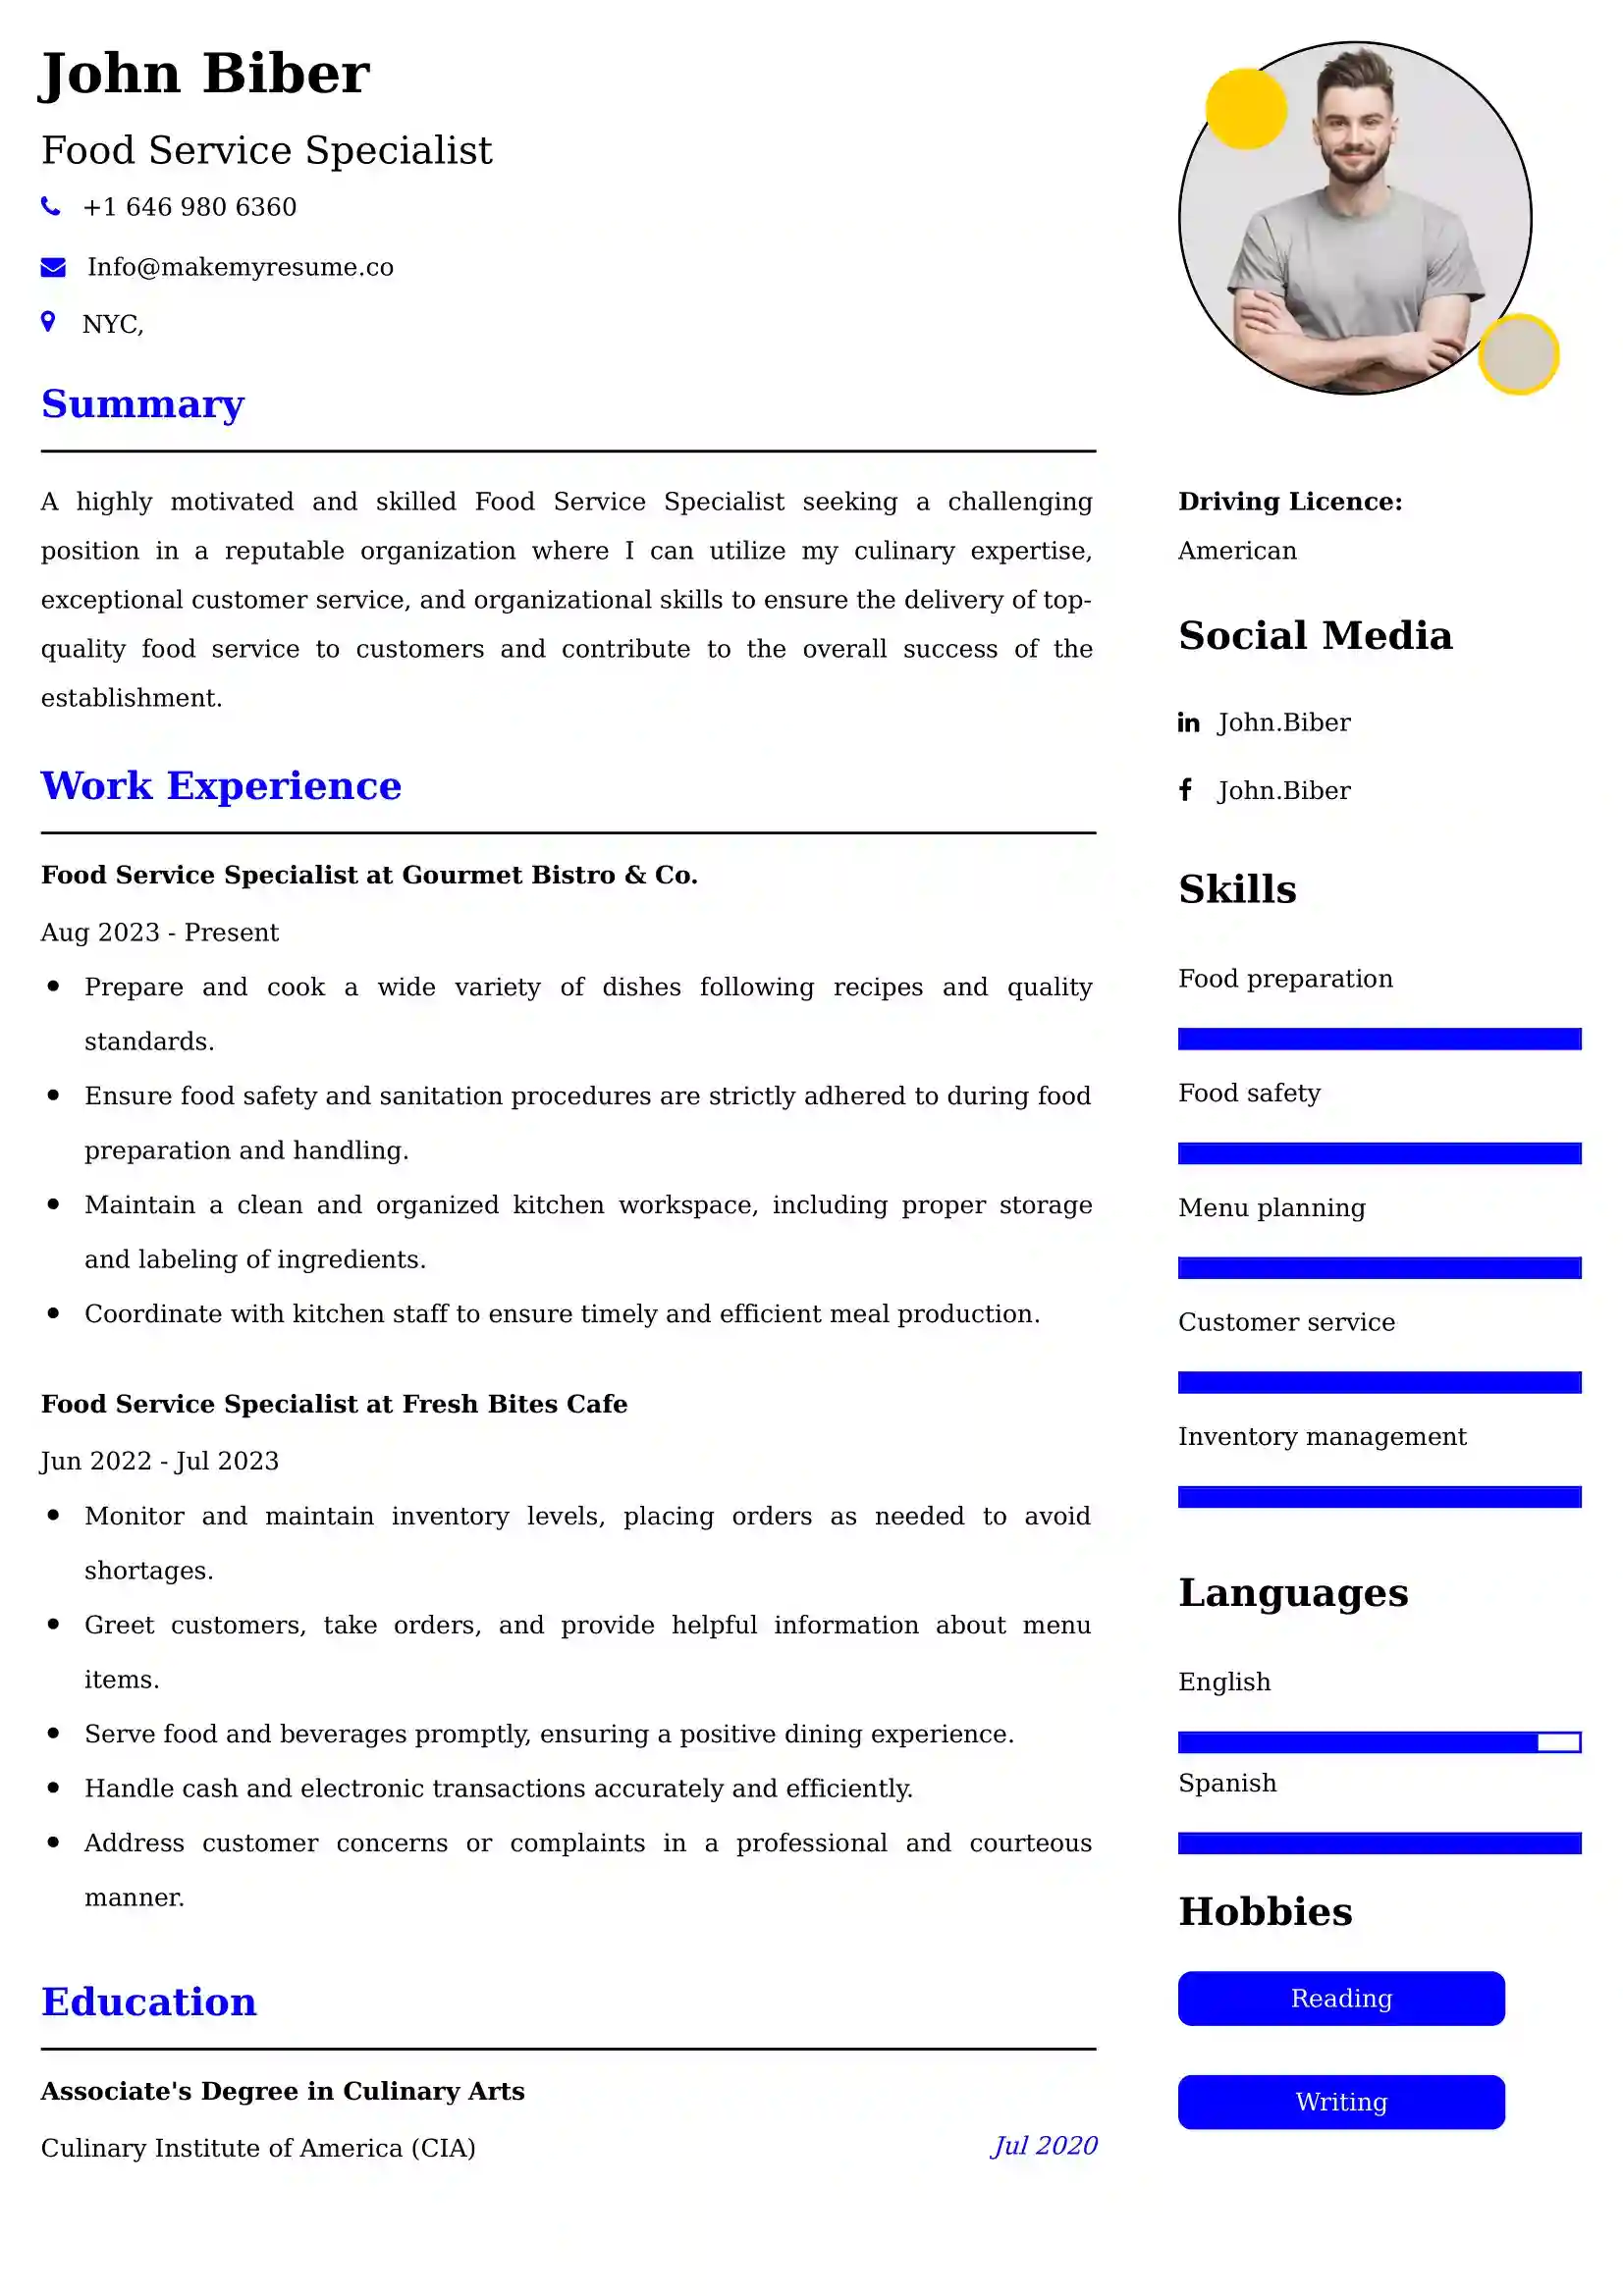 Food Service Specialist CV Examples Malaysia